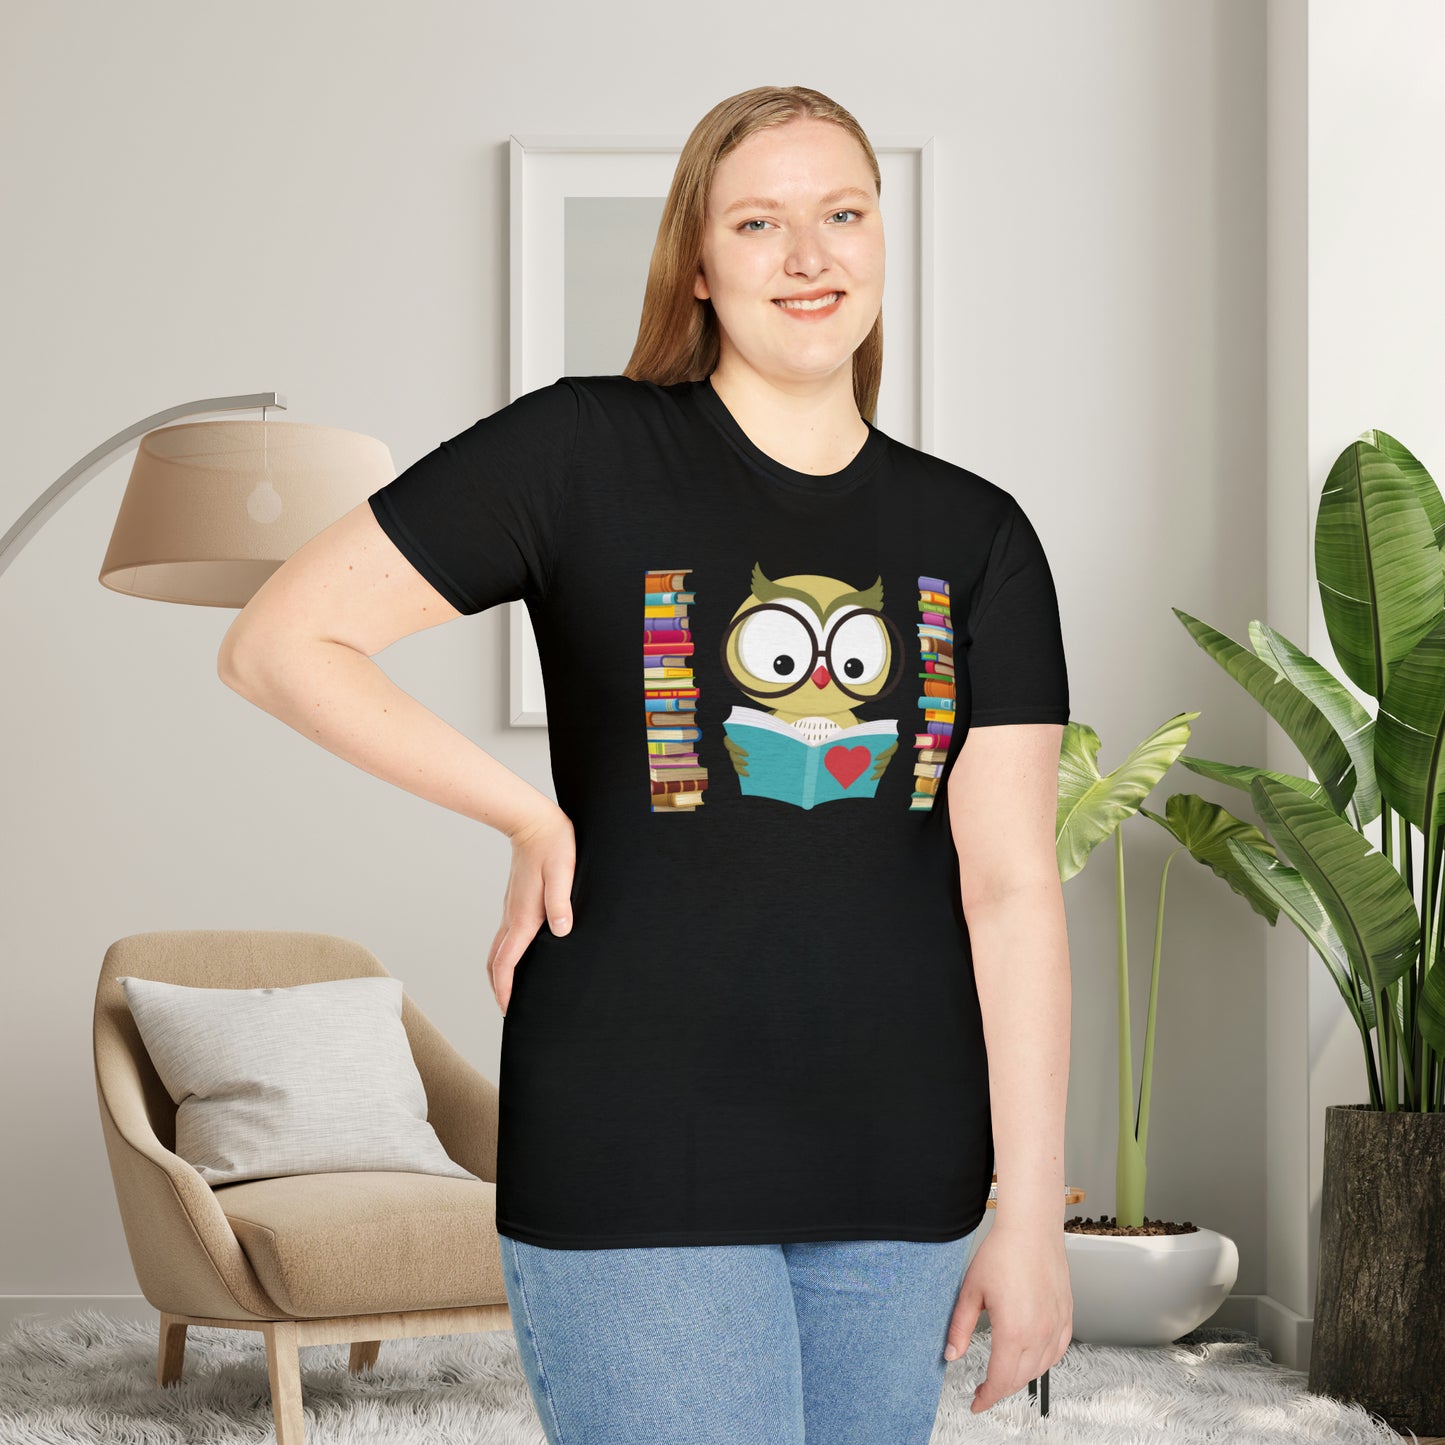 This celebrates all book lovers out there! Get this Unisex Softstyle T-Shirt as a gift or one for yourself.